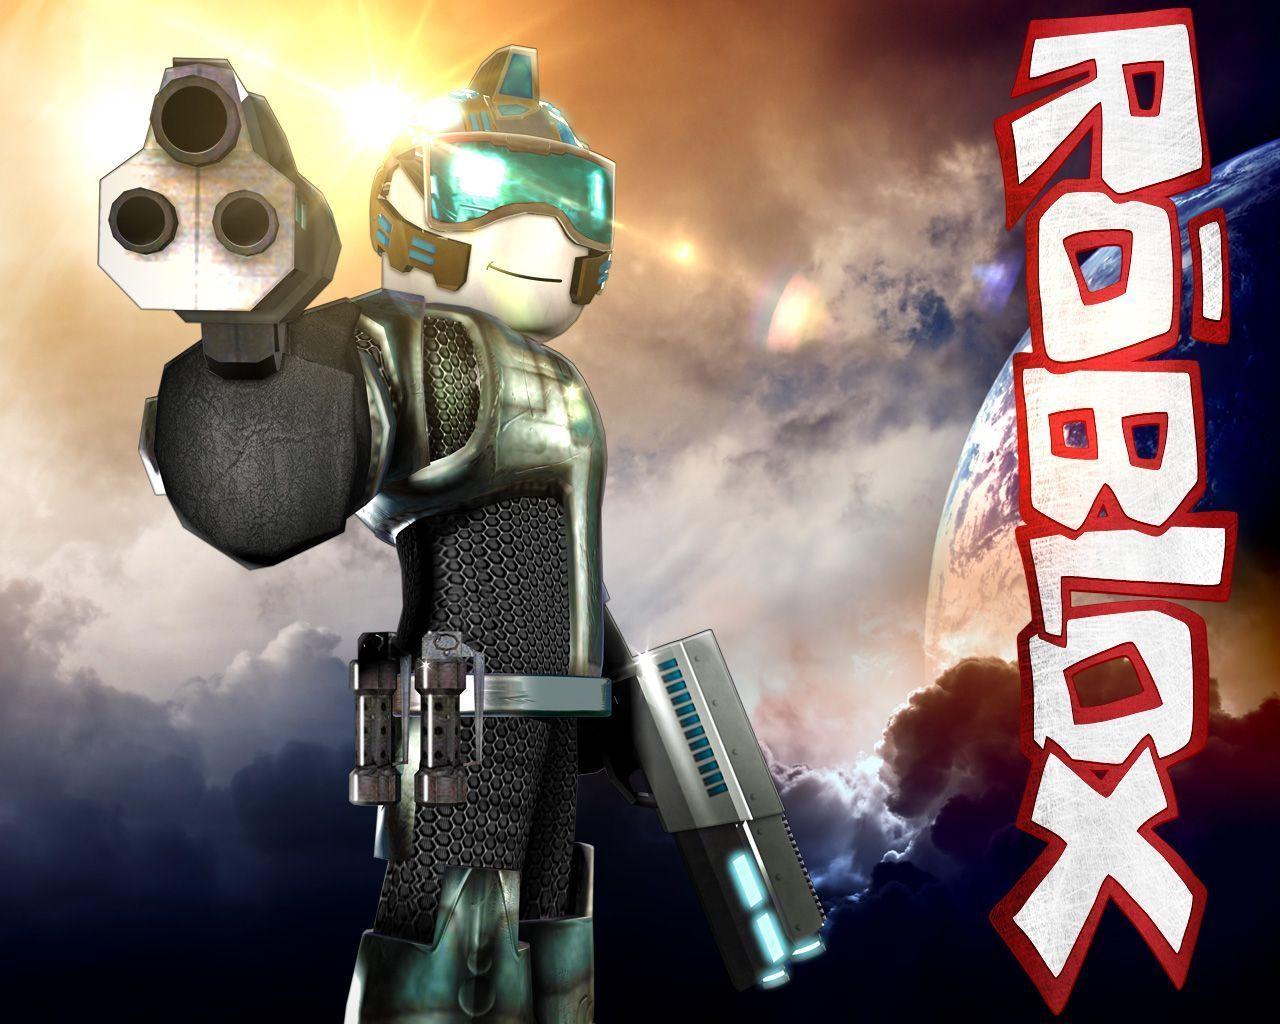 Awesome Roblox Wallpapers Top Free Awesome Roblox Backgrounds Wallpaperaccess - cool roblox game backgrounds